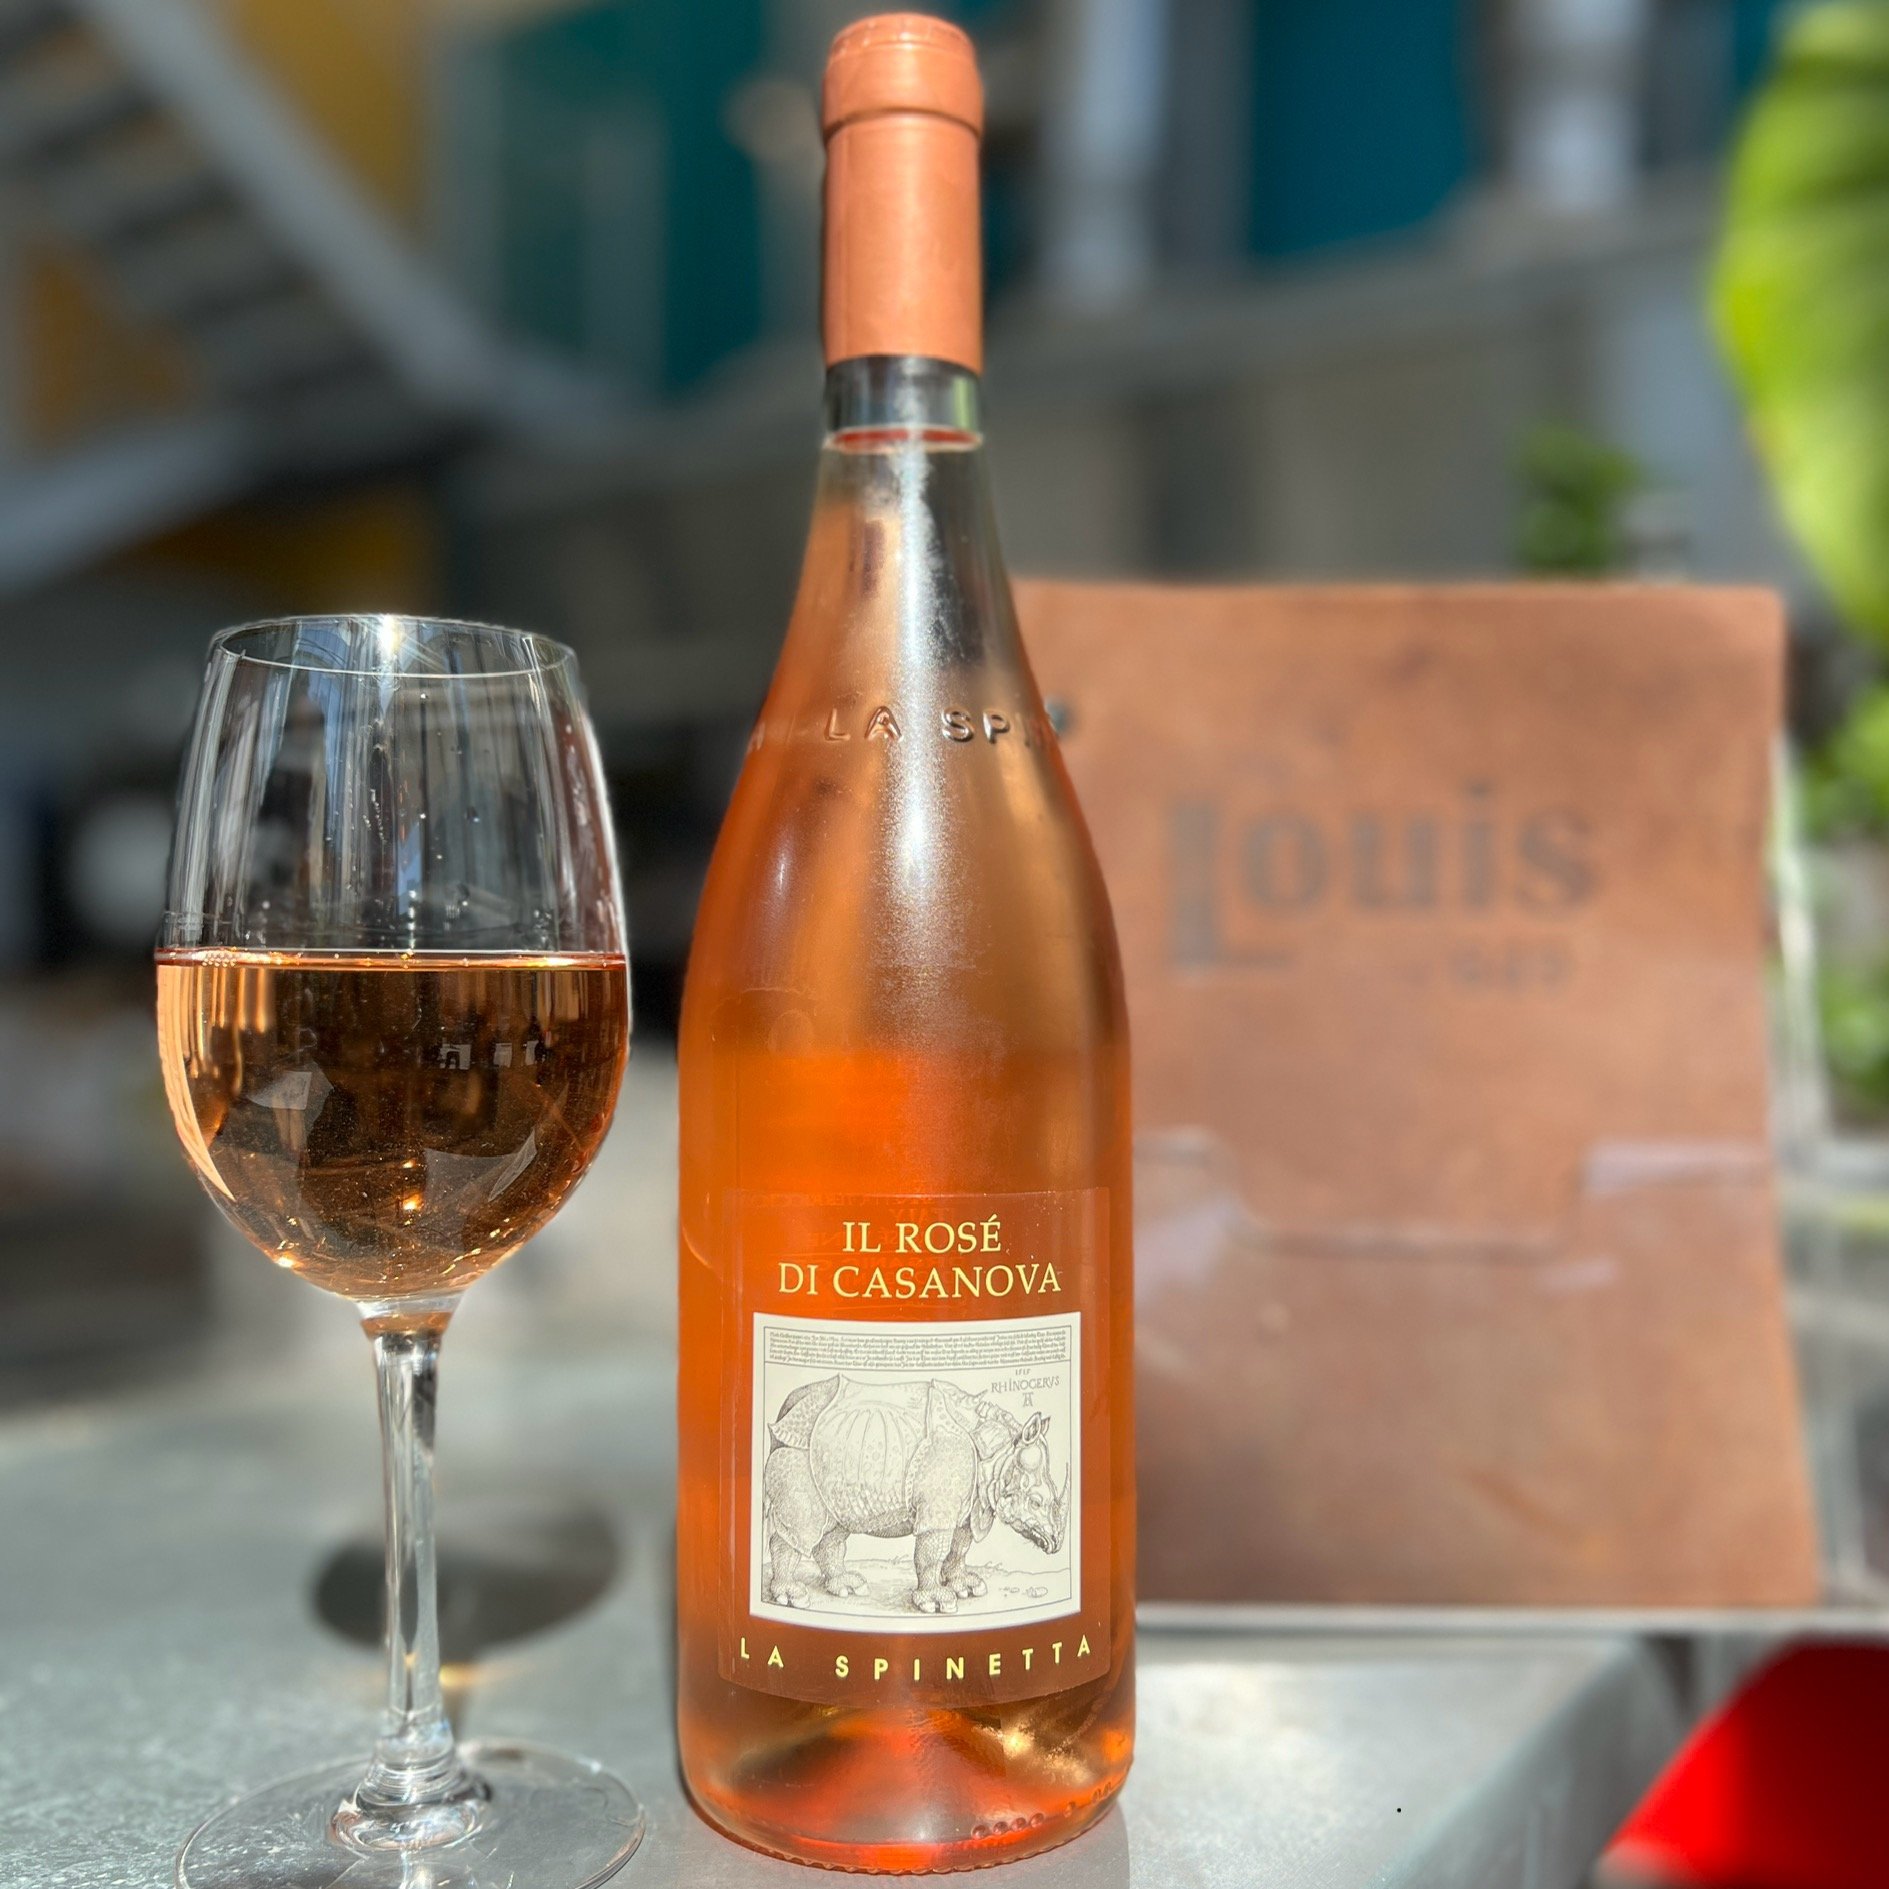 It's that time of year where we are ready to sit by a pool and crush a whole bottle of wine...well may we present the Louis Bar's NEWEST addition...La Spinetta's &quot;Il Ros&eacute; di Casanova!&quot; This fresh and elegant ros&eacute; has notes of 